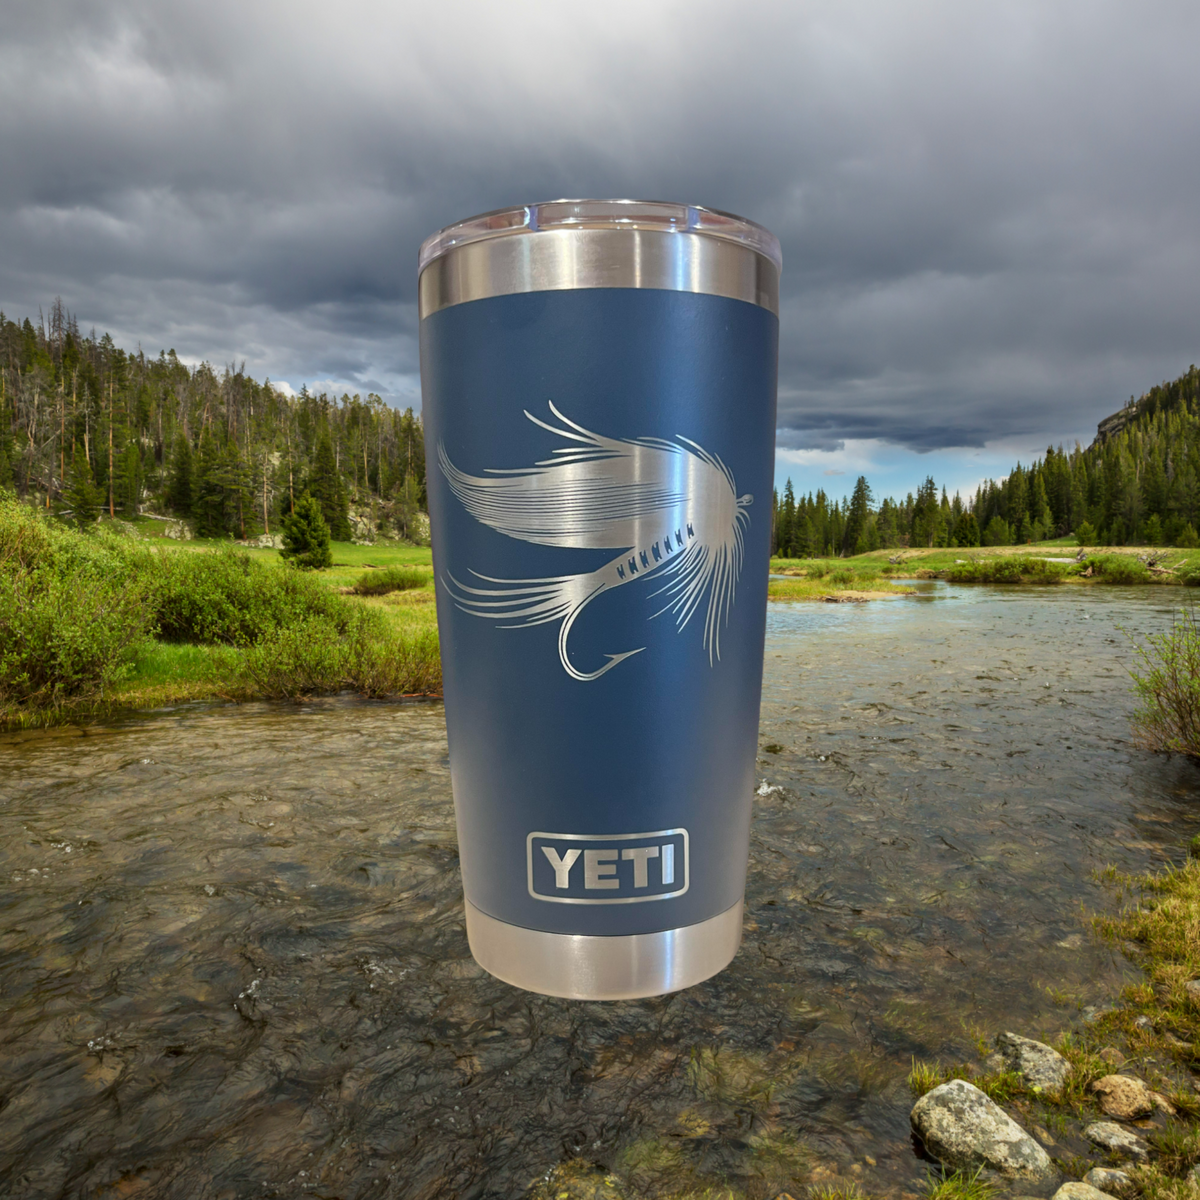 https://cdn.shopify.com/s/files/1/0606/5497/7184/files/wind_river_outpost_fly_fishing_yeti_navy_river_1200x.png?v=1690329006